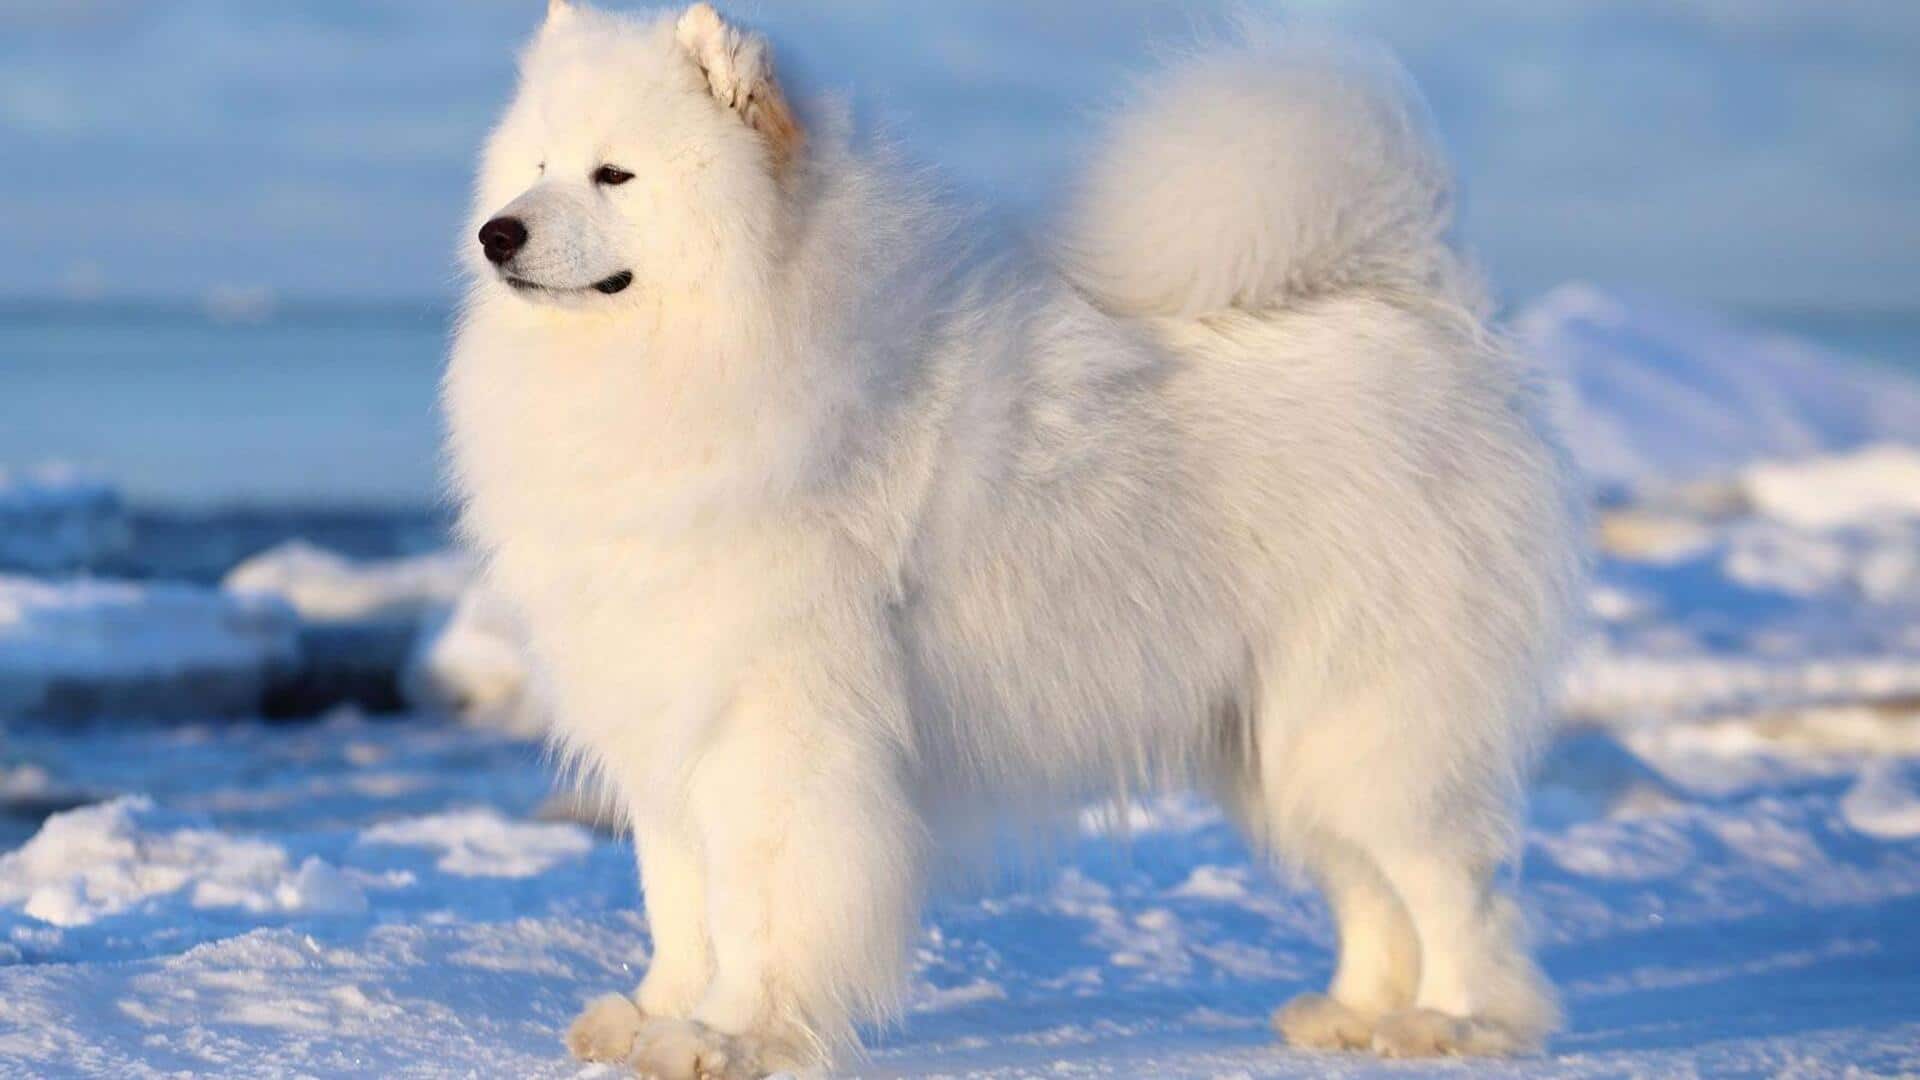 How to take care of Samoyed's coat? Follow these tips